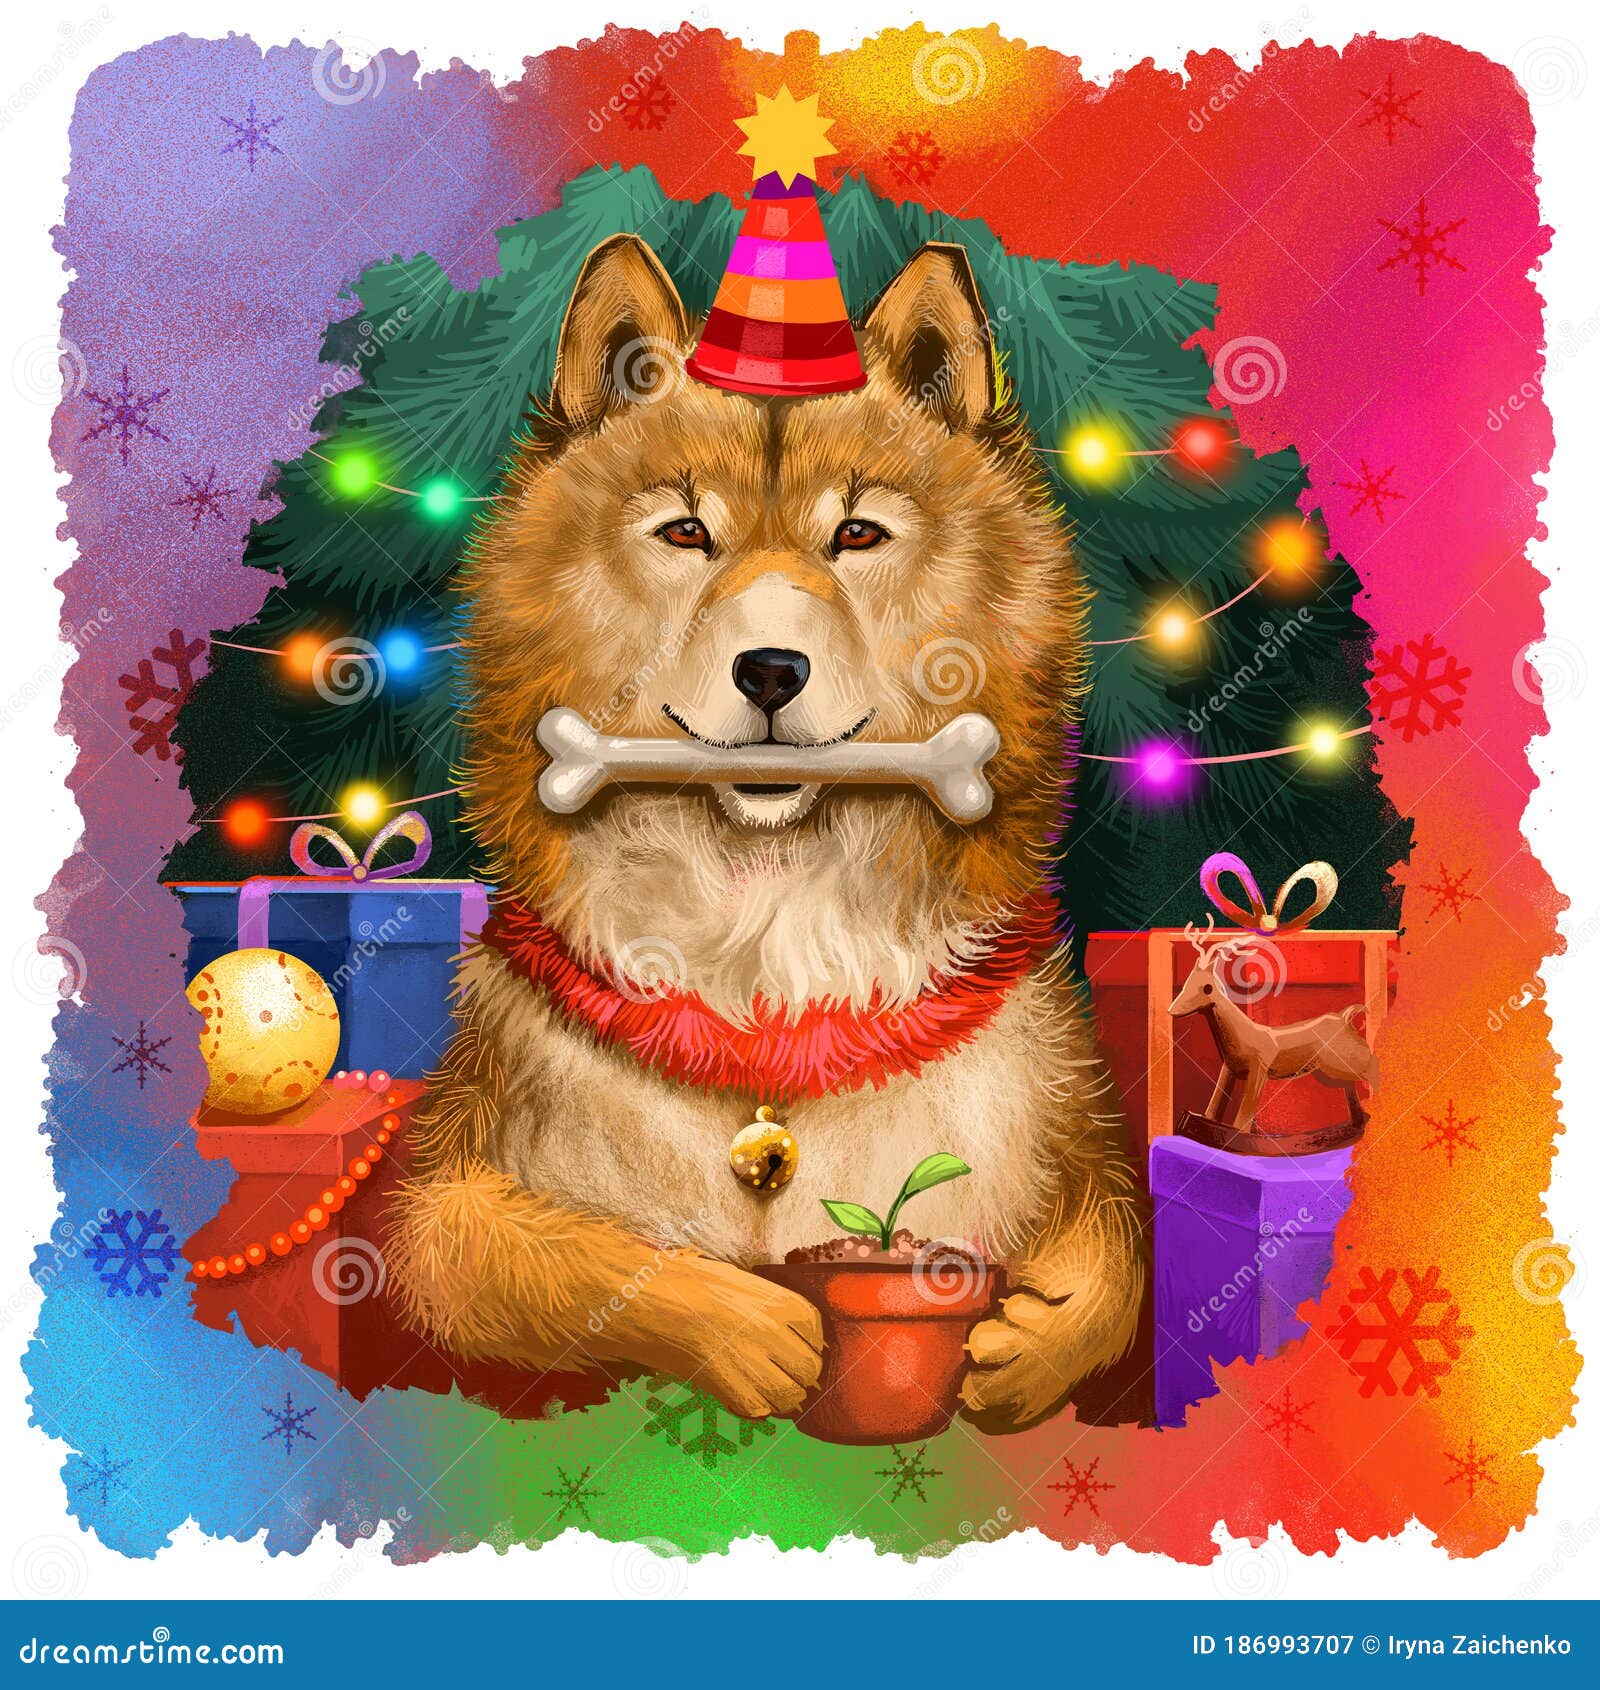 Cute Dog In Holiday Hat And Bone In Mouth Year Of Dog By Chinese Horoscope Merry Christmas Happy New Year Greeting Card Design Stock Illustration Illustration Of Celebration Holiday 186993707